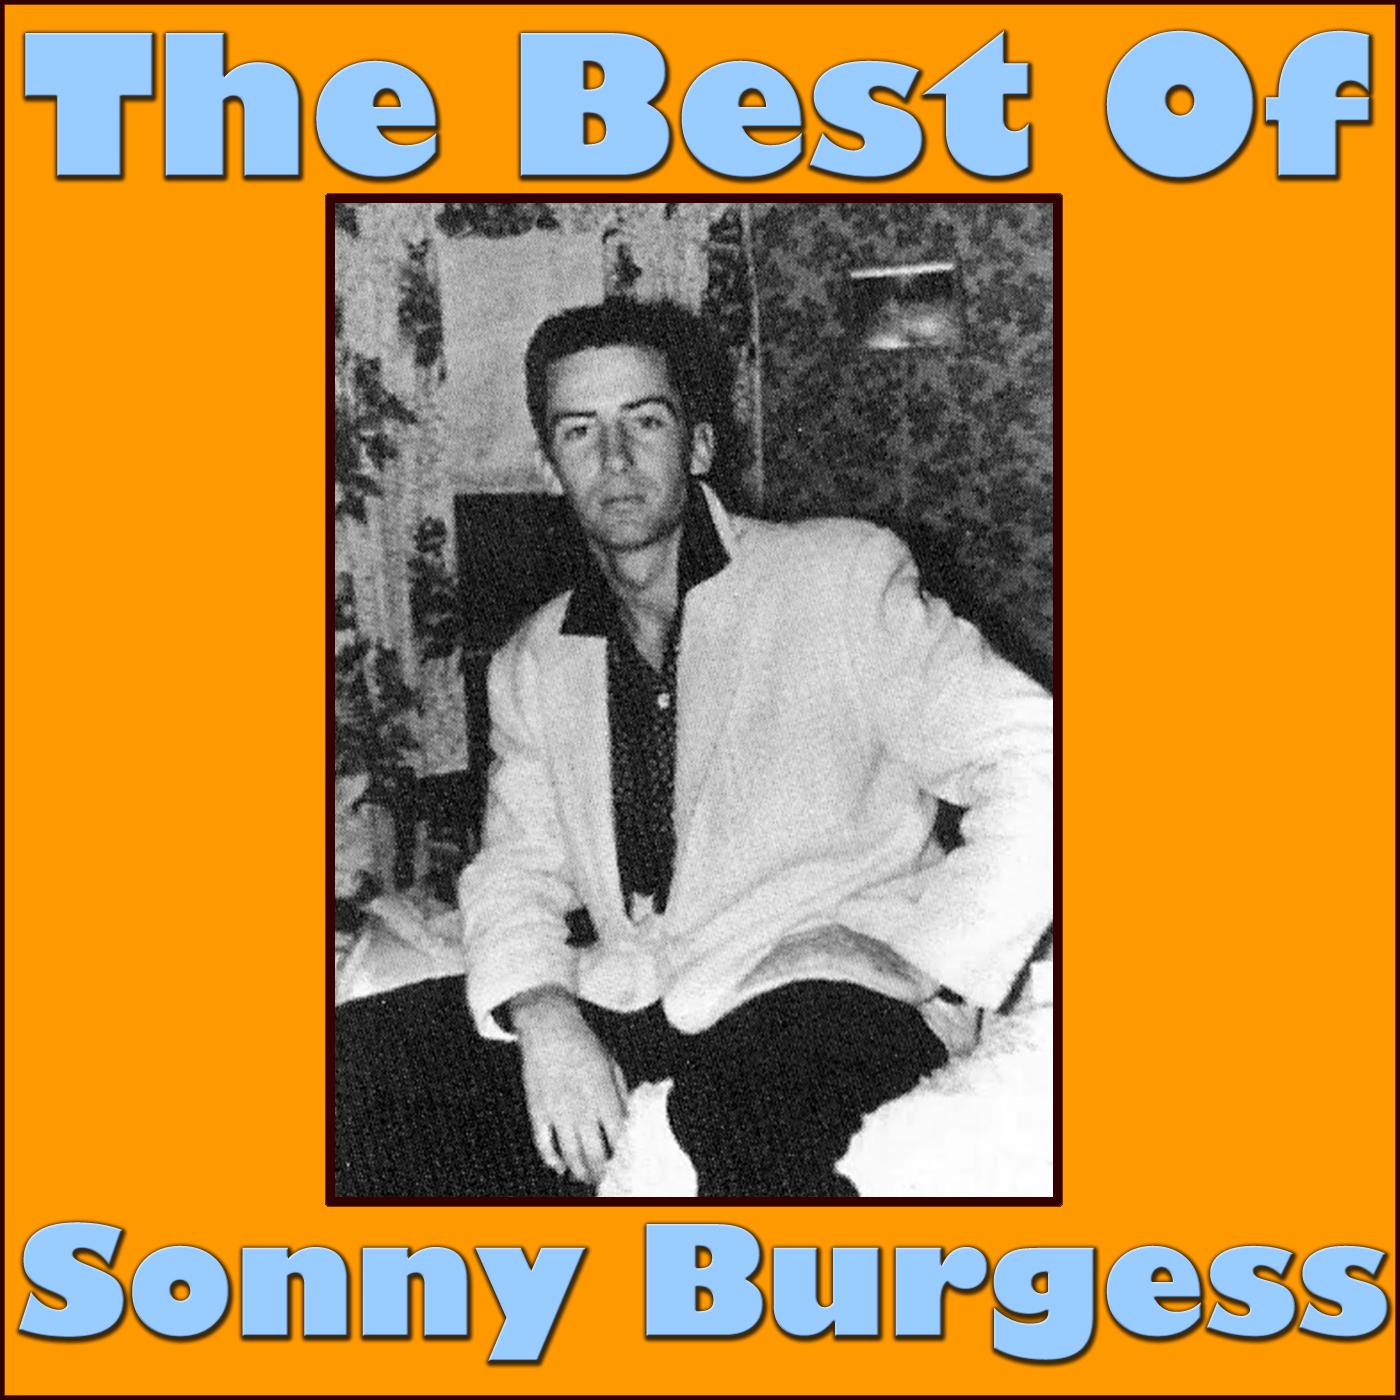 The Best Of Sonny Burgess